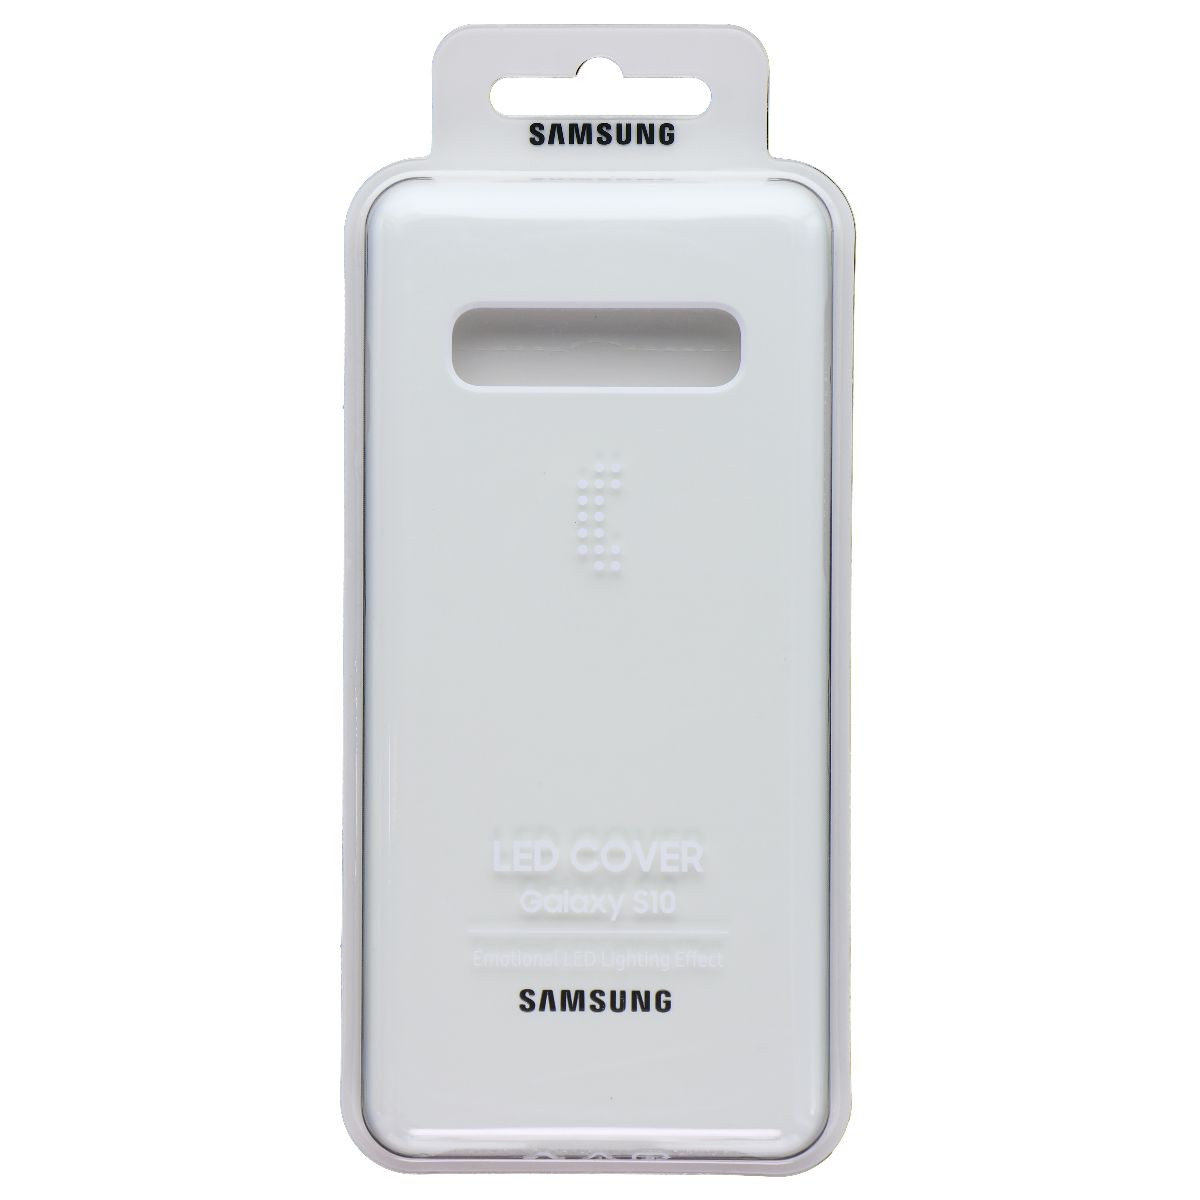 Samsung Official LED Cover for Samsung Galaxy S10 - White